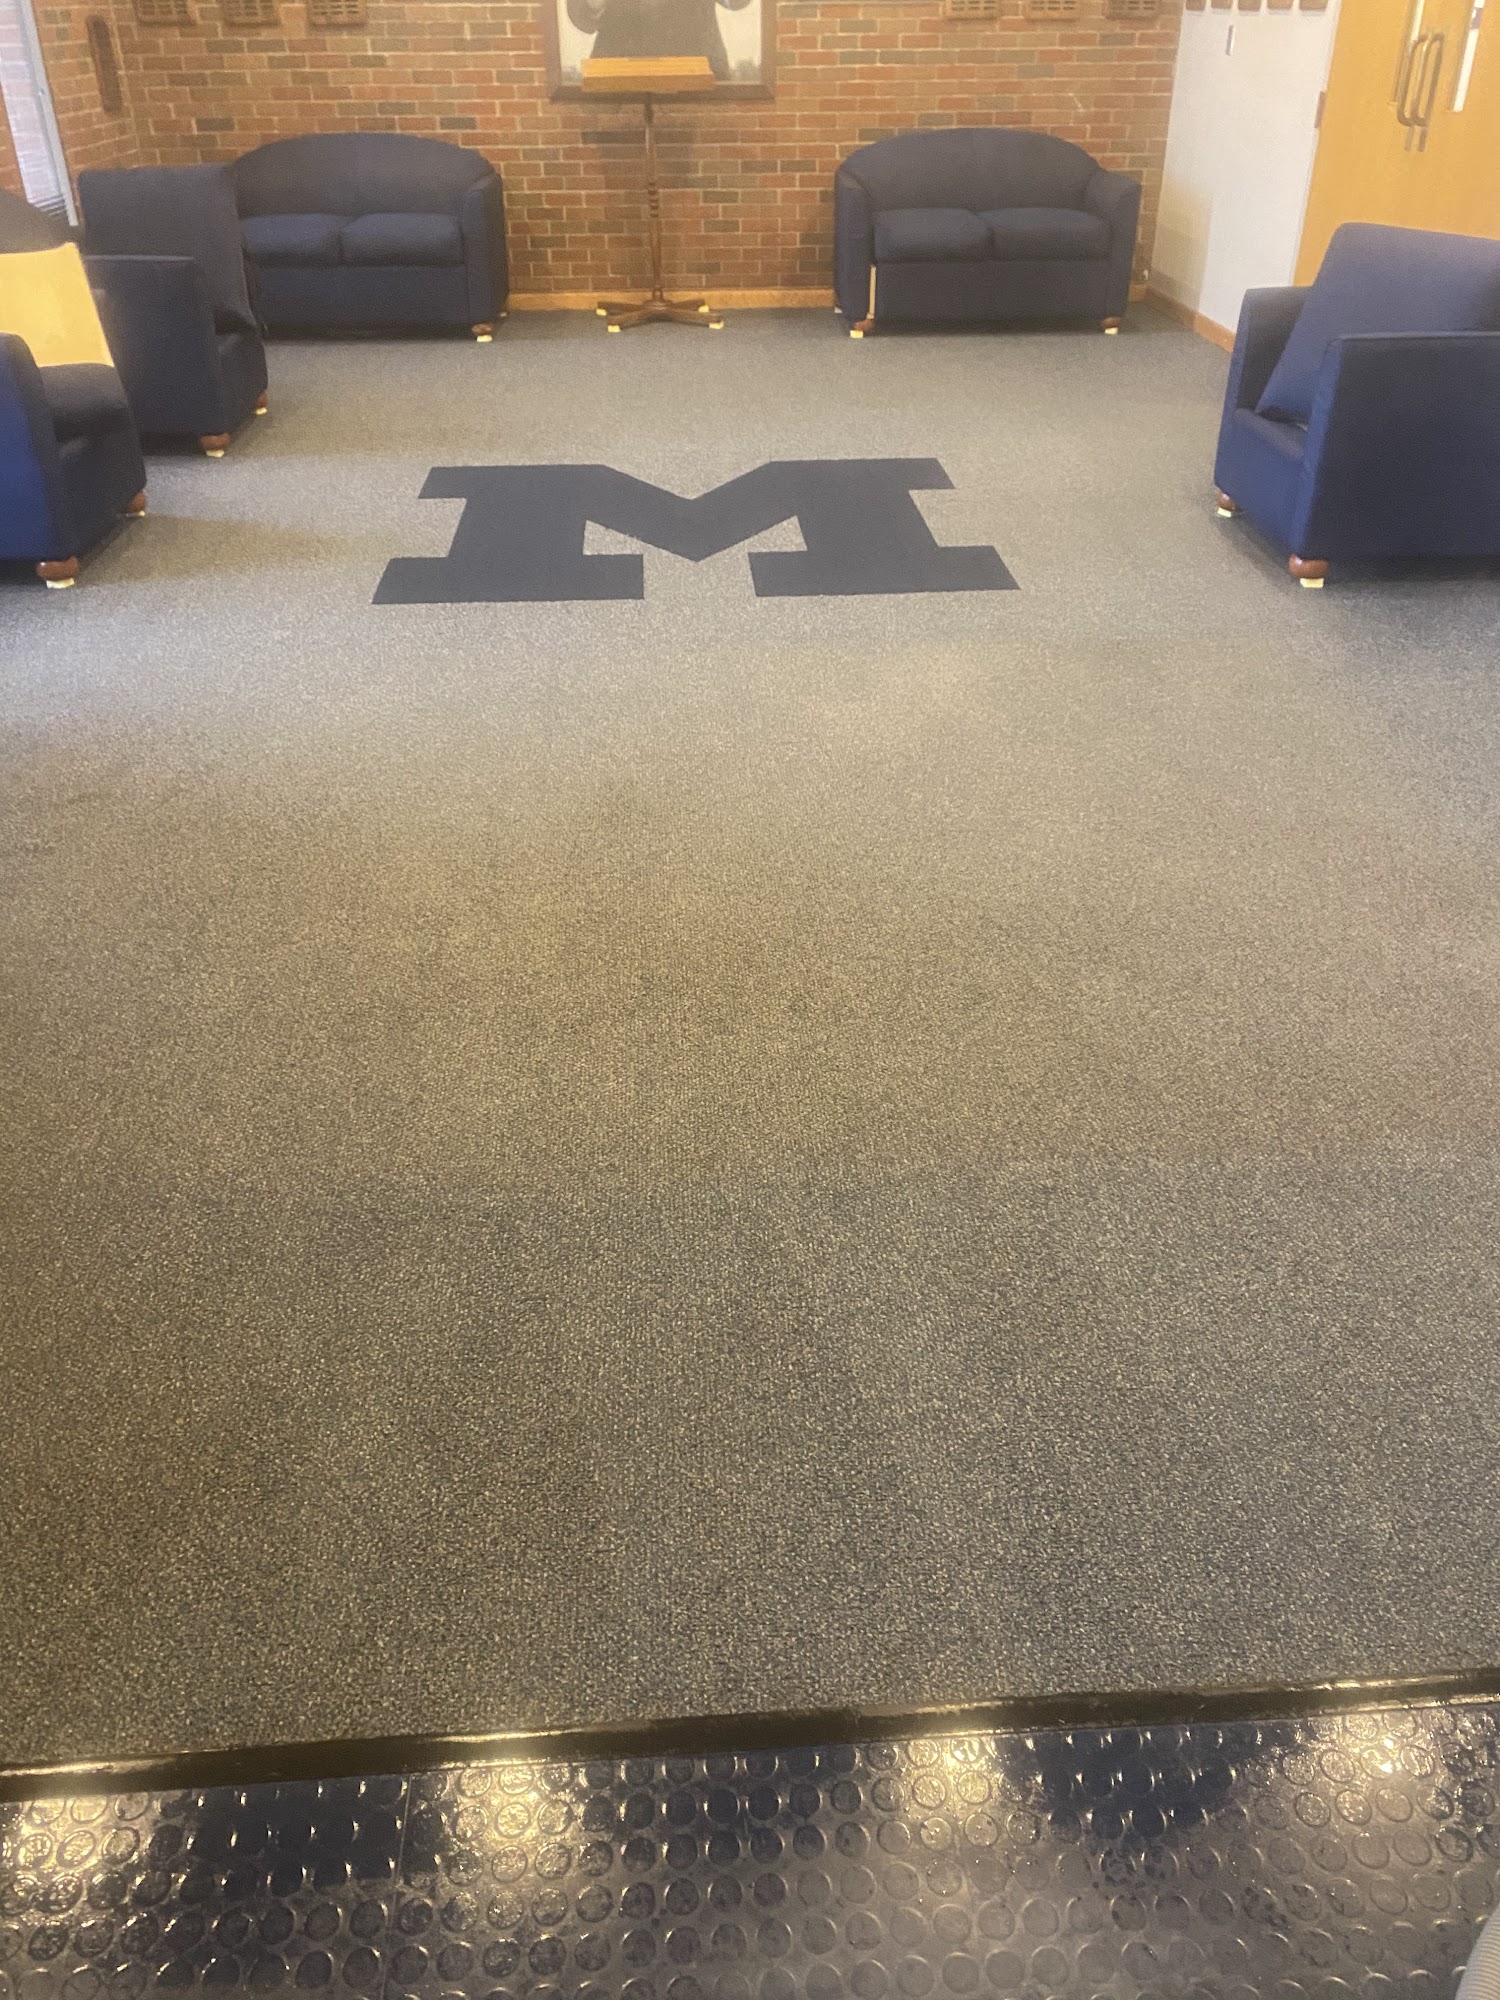 Ann Arbor Rug and Carpet Cleaning